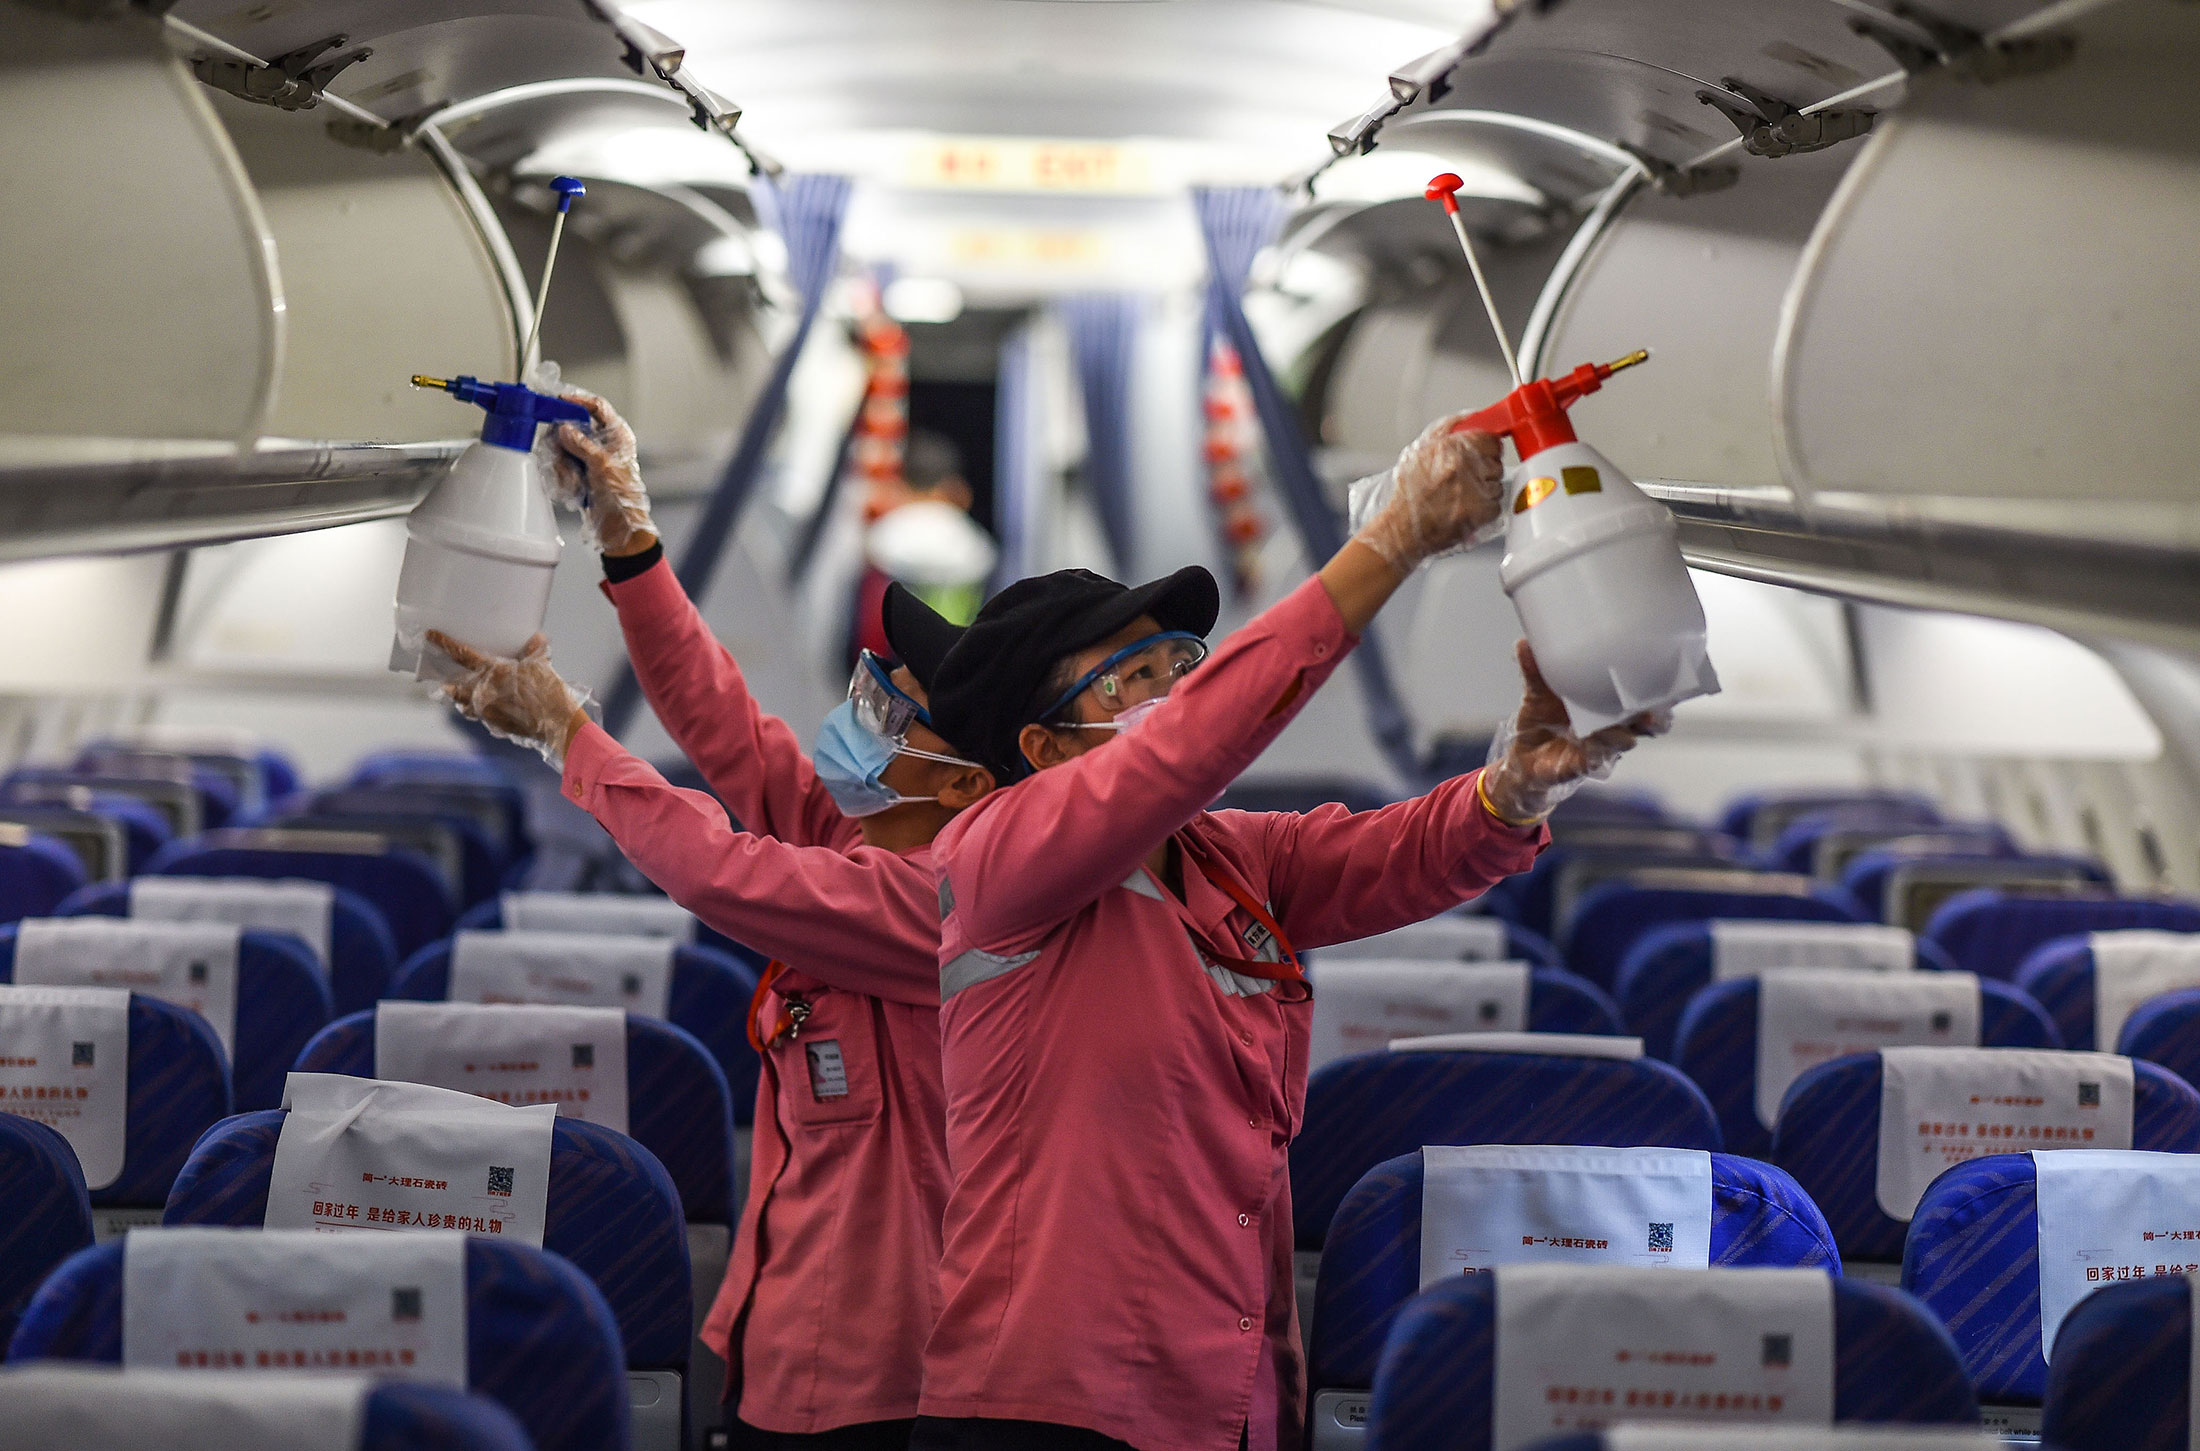 Disinfecting an airplane cabin at the Haikou Meilan Airport in China’s Hainan province on Jan. 31.